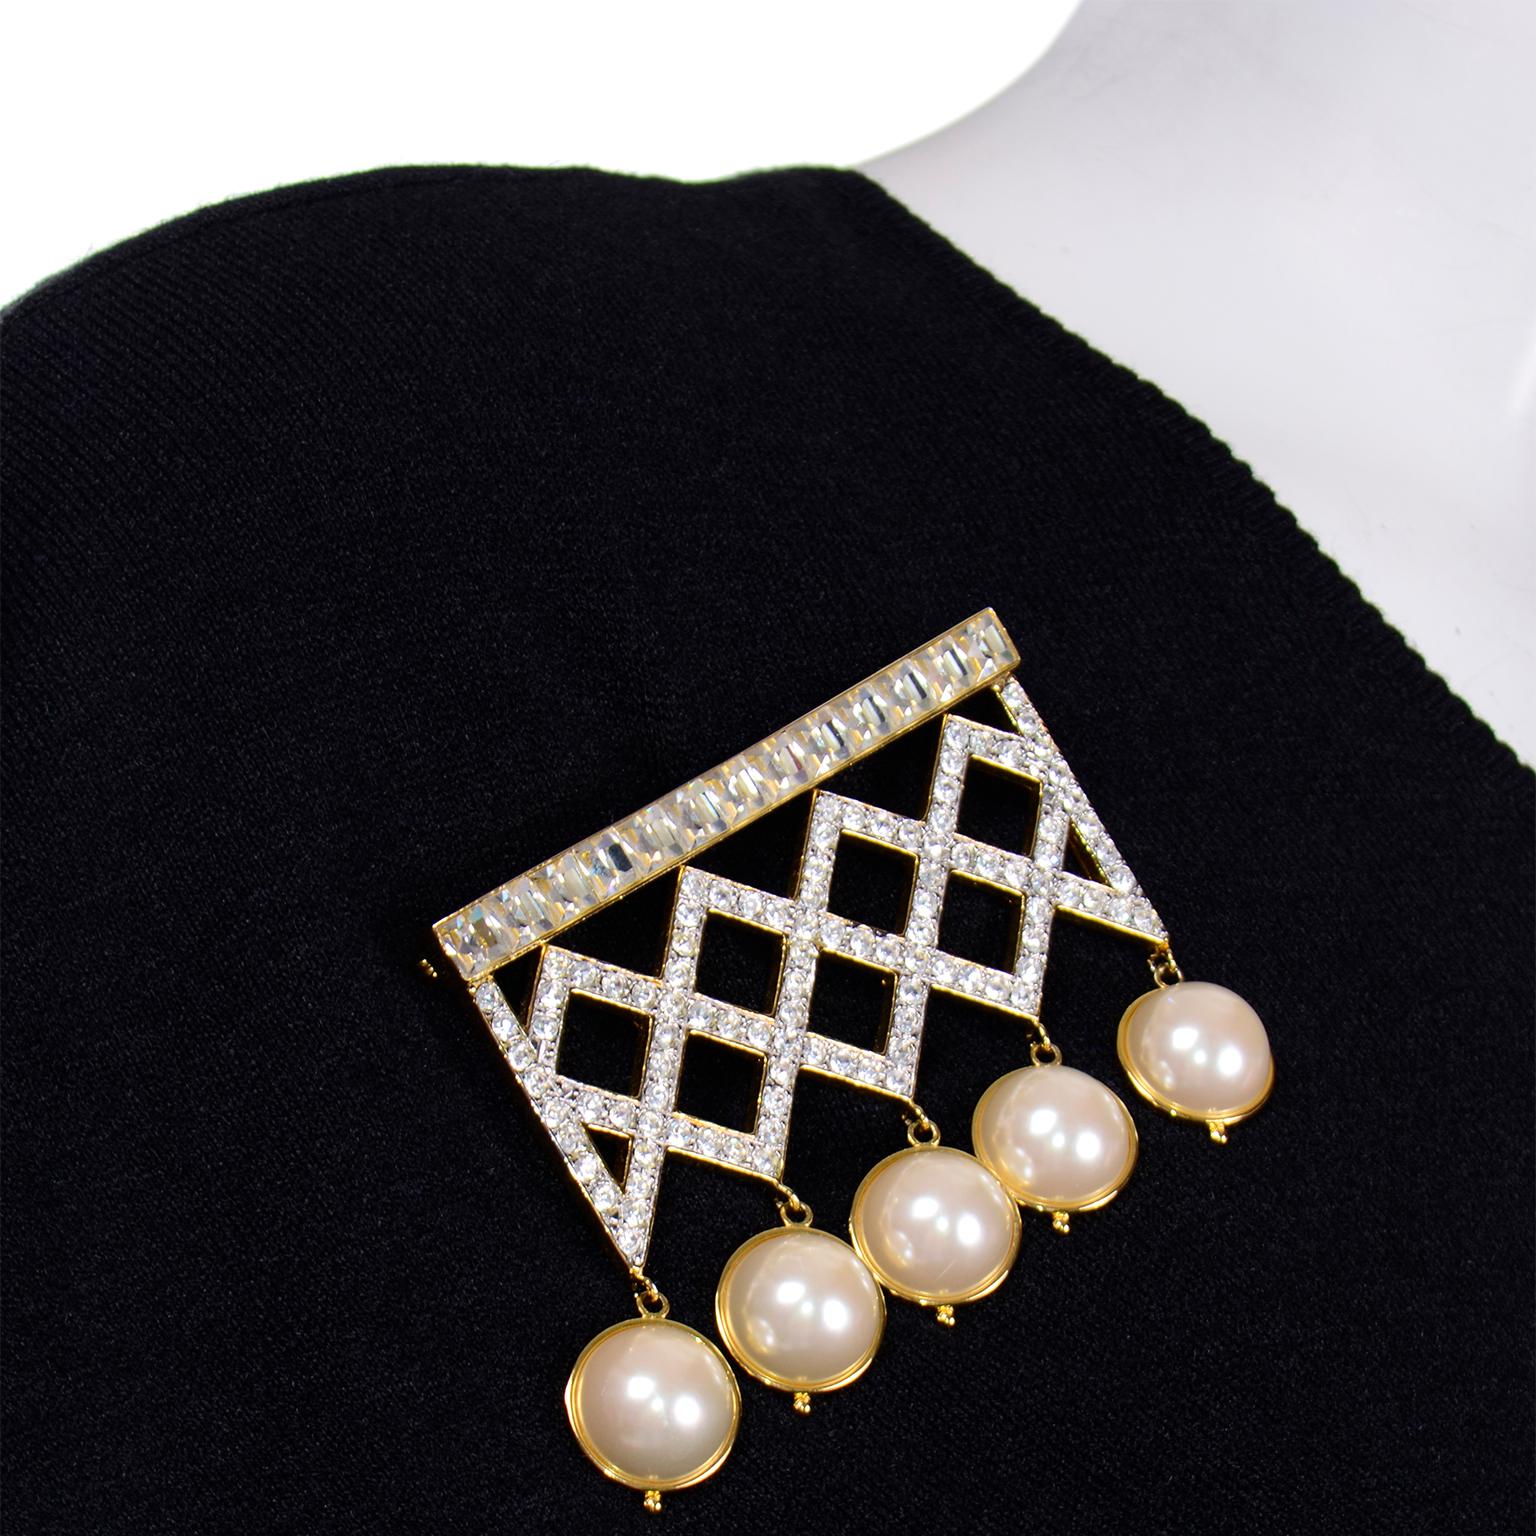 This is a stunning vintage Valentino Garavani gold tone crystal and faux pearl large rectangular brooch with a double pin back. There is a large pin laying horizontally across the back and a center pin to support the weight and size. This brooch has